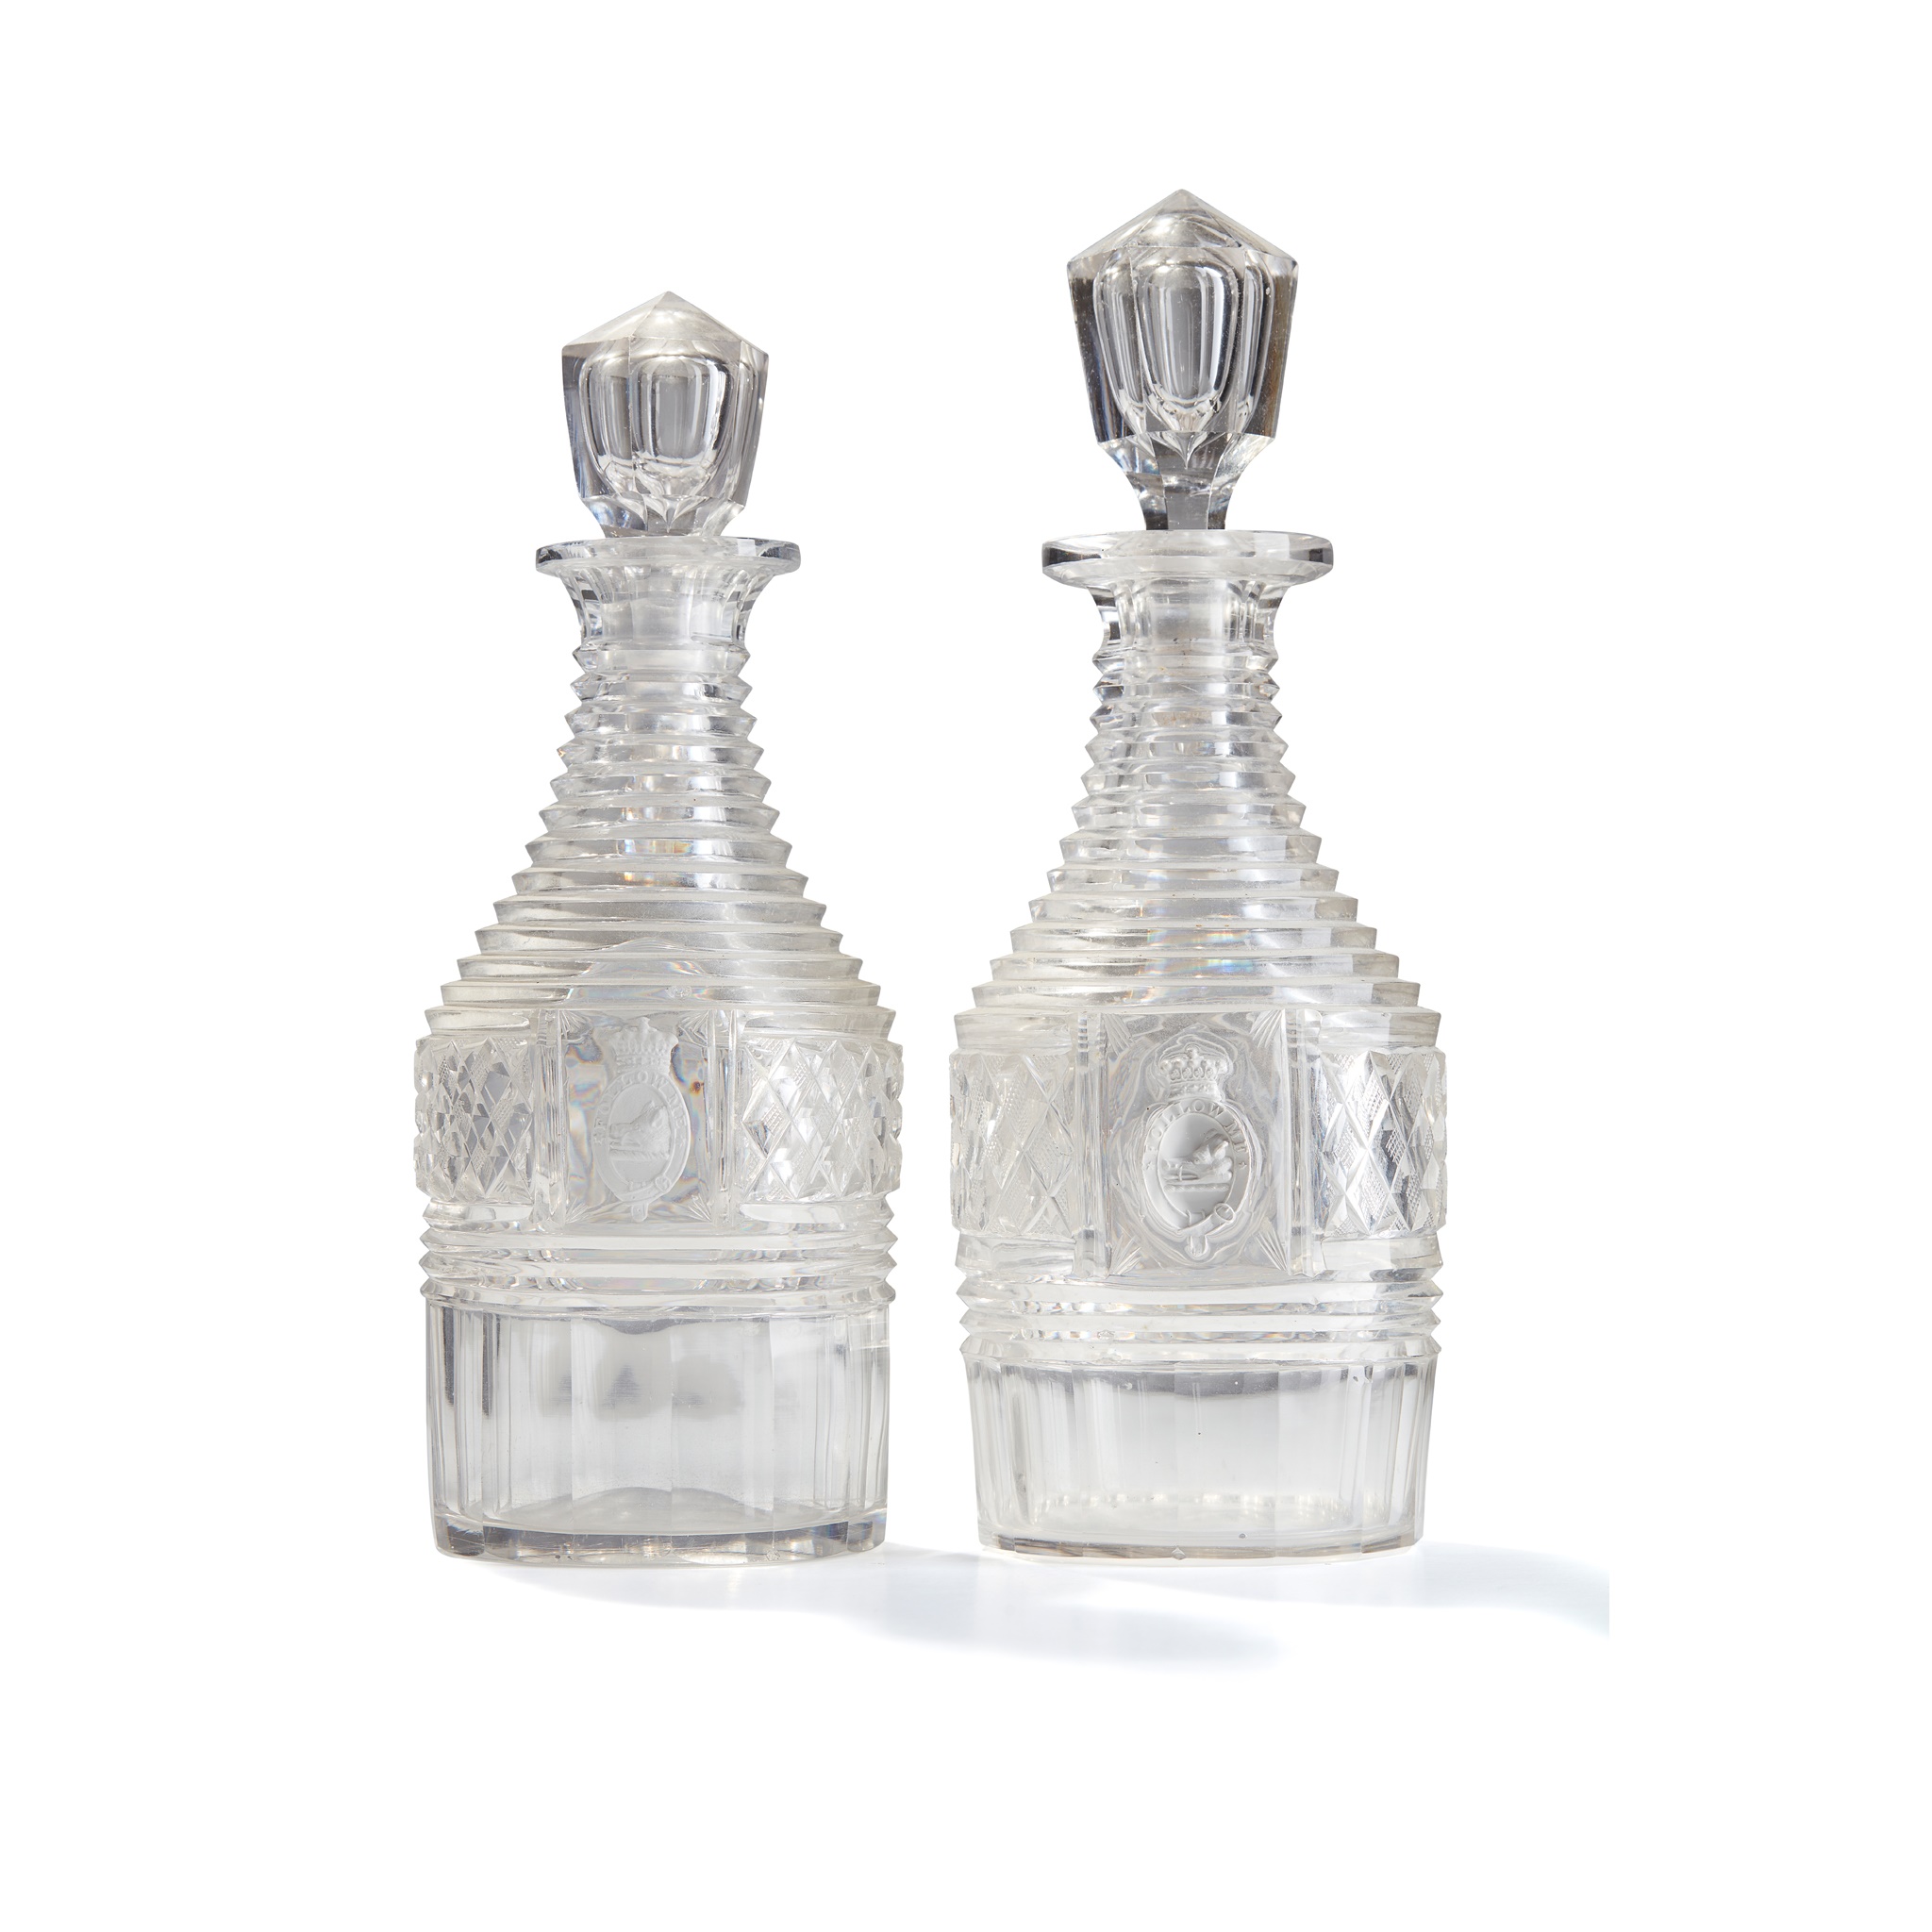 PAIR OF FULL BOTTLE DECANTERS BEARING THE BREADALBANE CREST AND MOTTO EARLY 19TH CENTURY